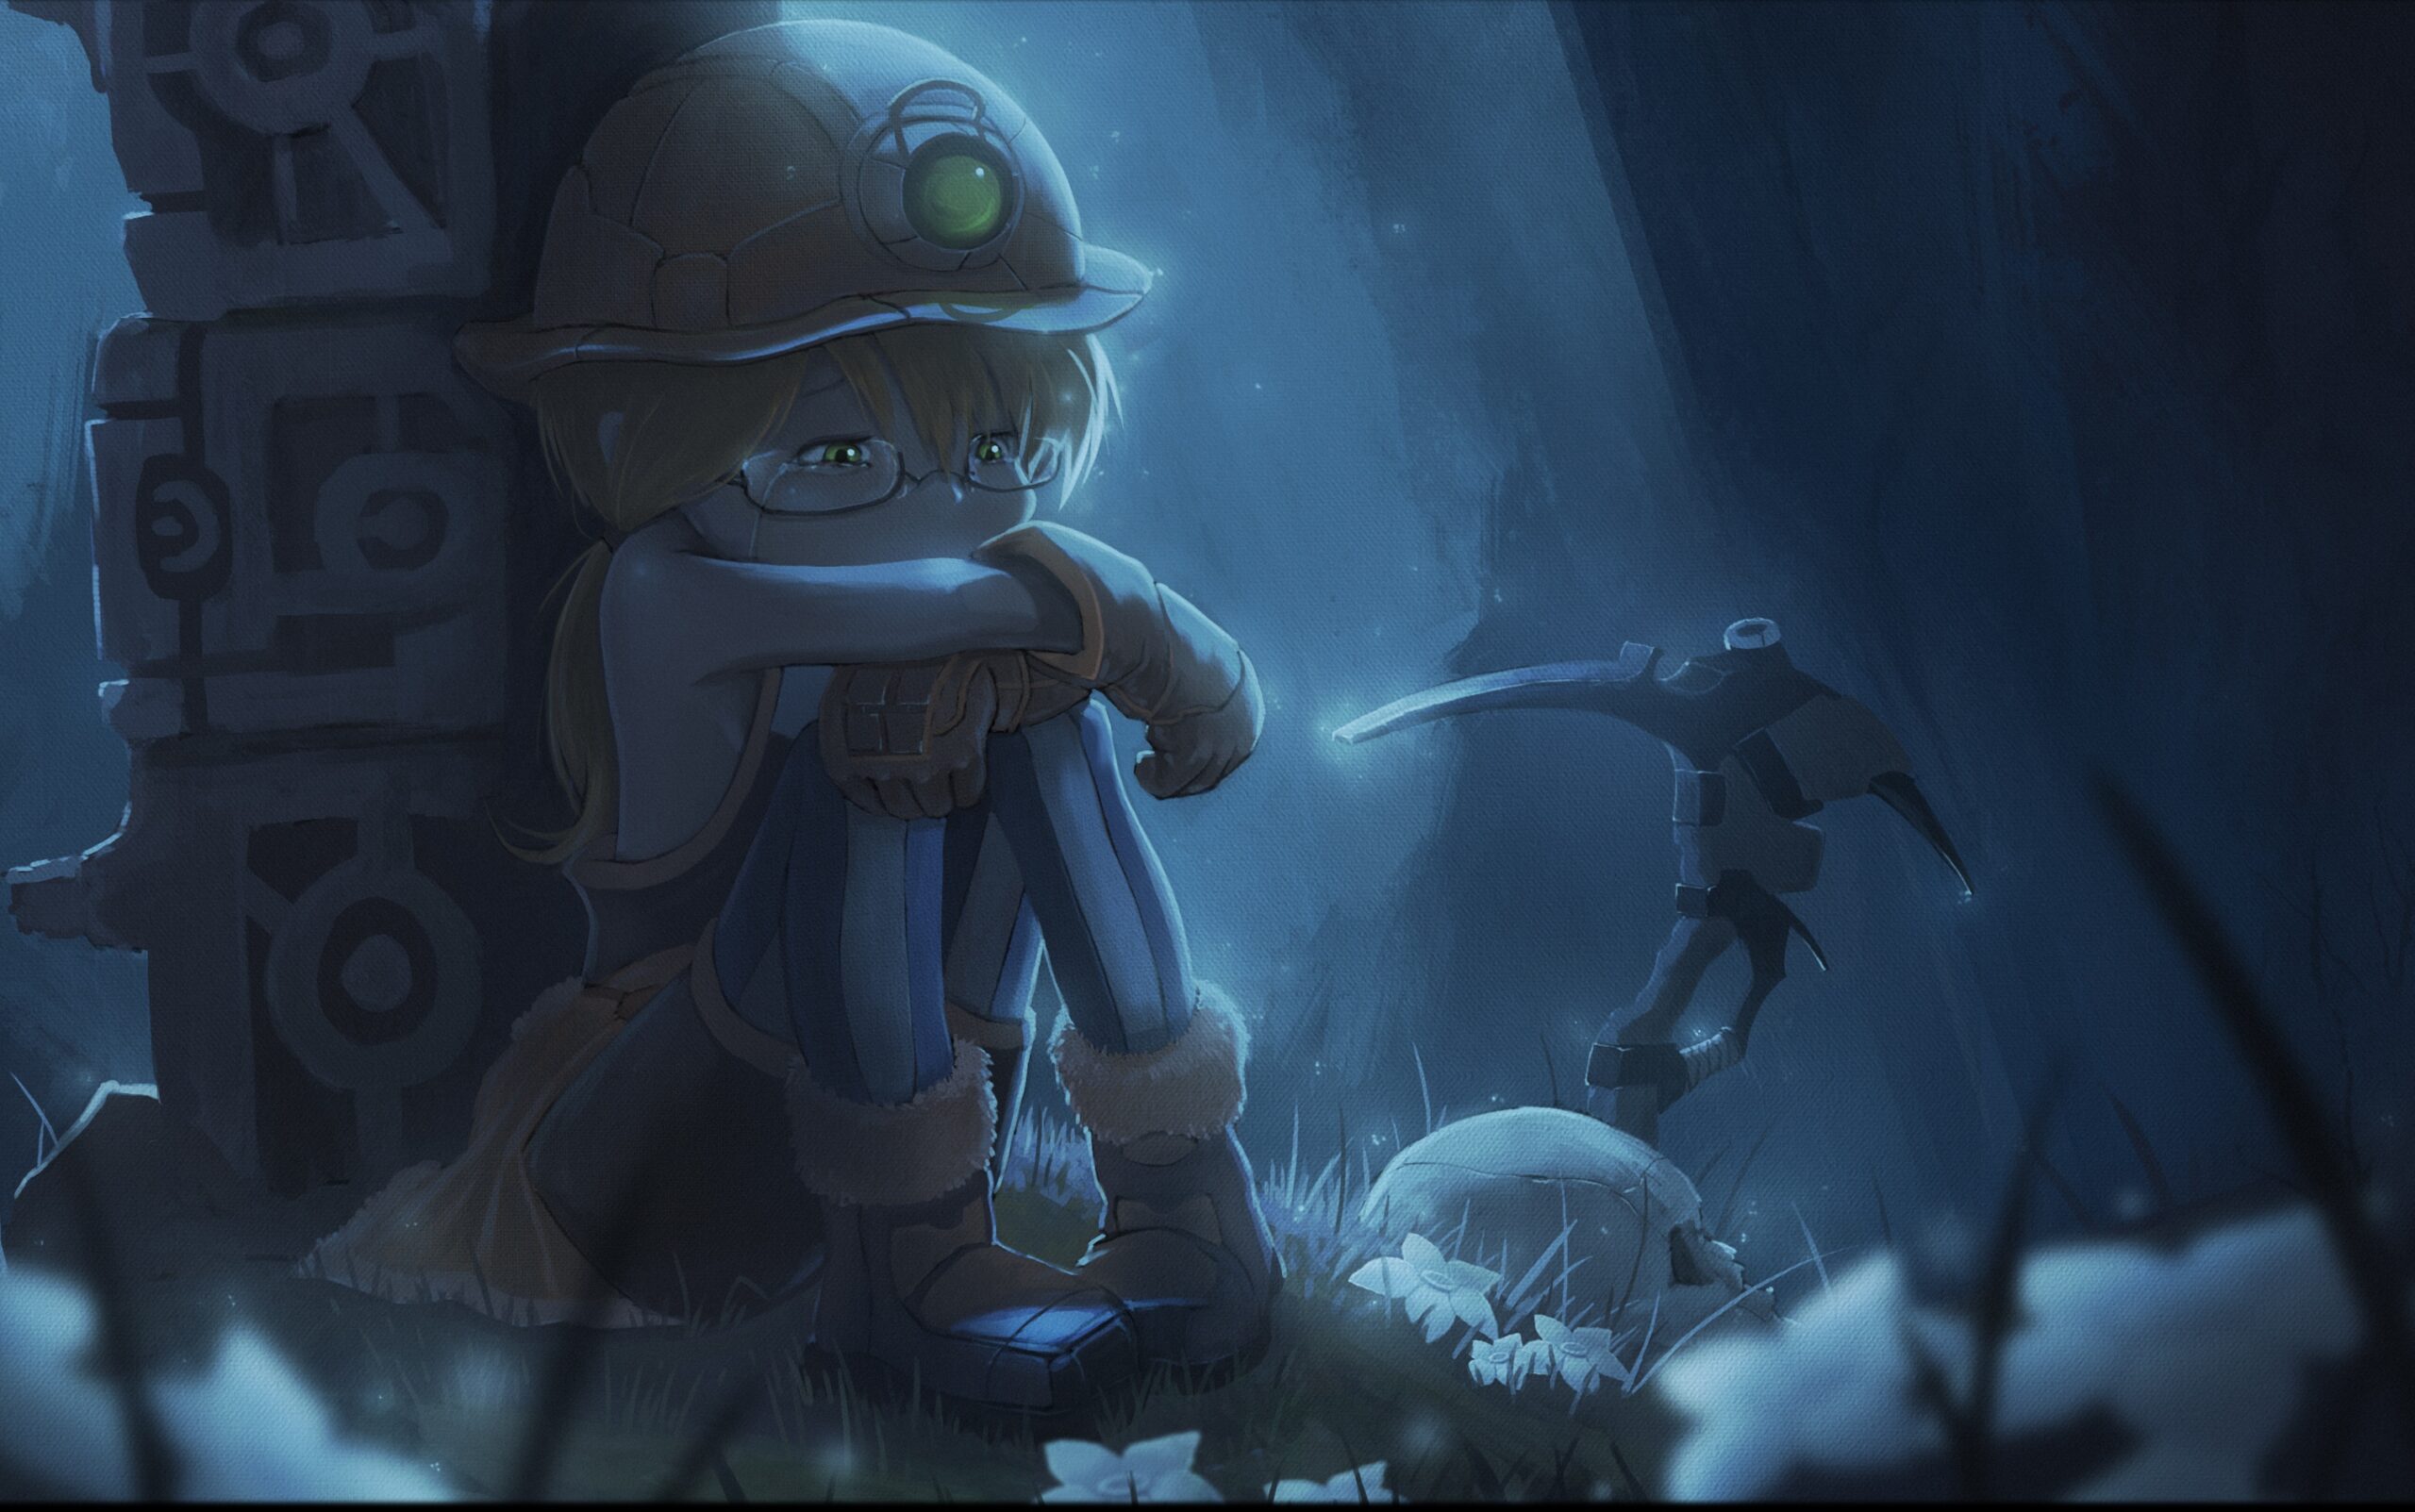 Wallpapers Riko Made in Abyss, Made in Abyss, pickaxes, Miner